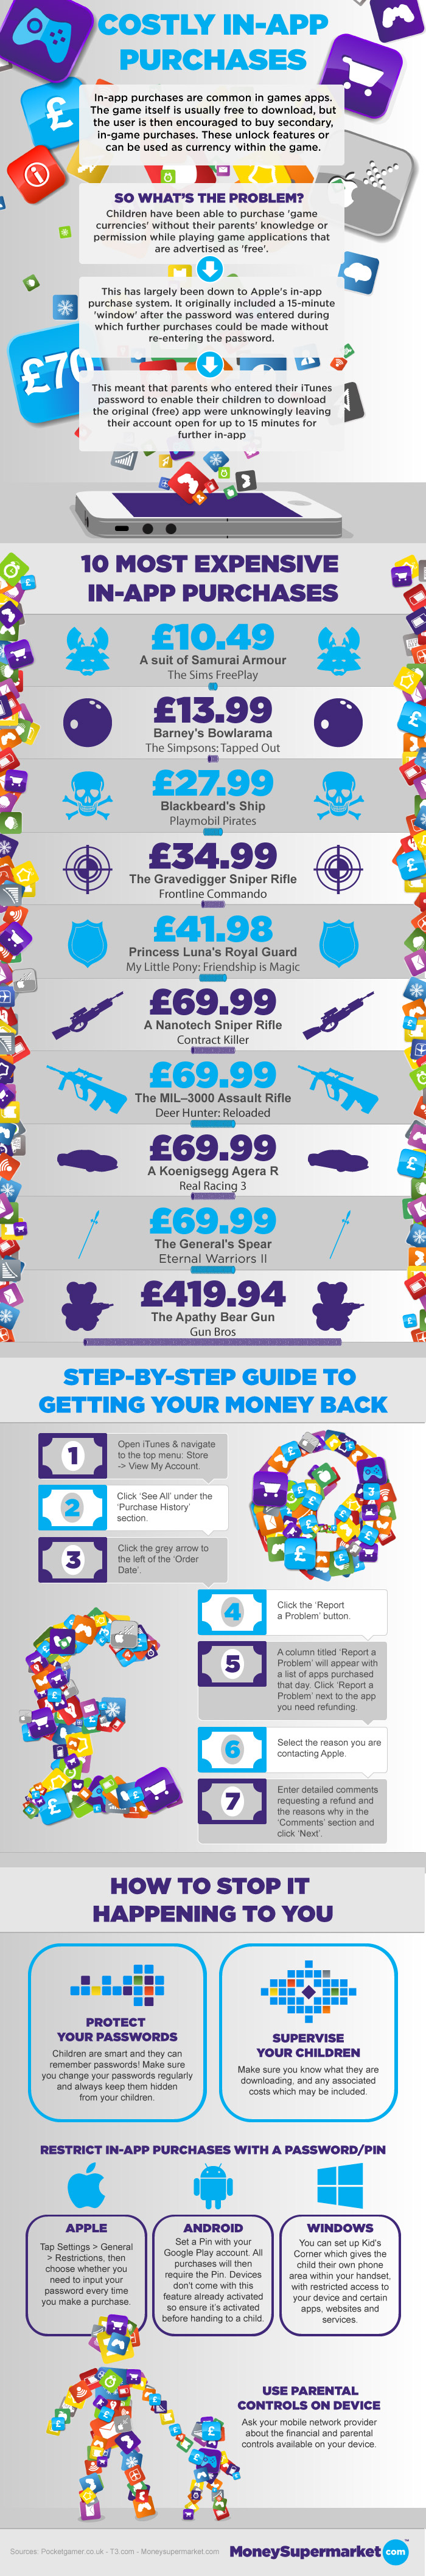 Costly In-app Purchases [Infographic]